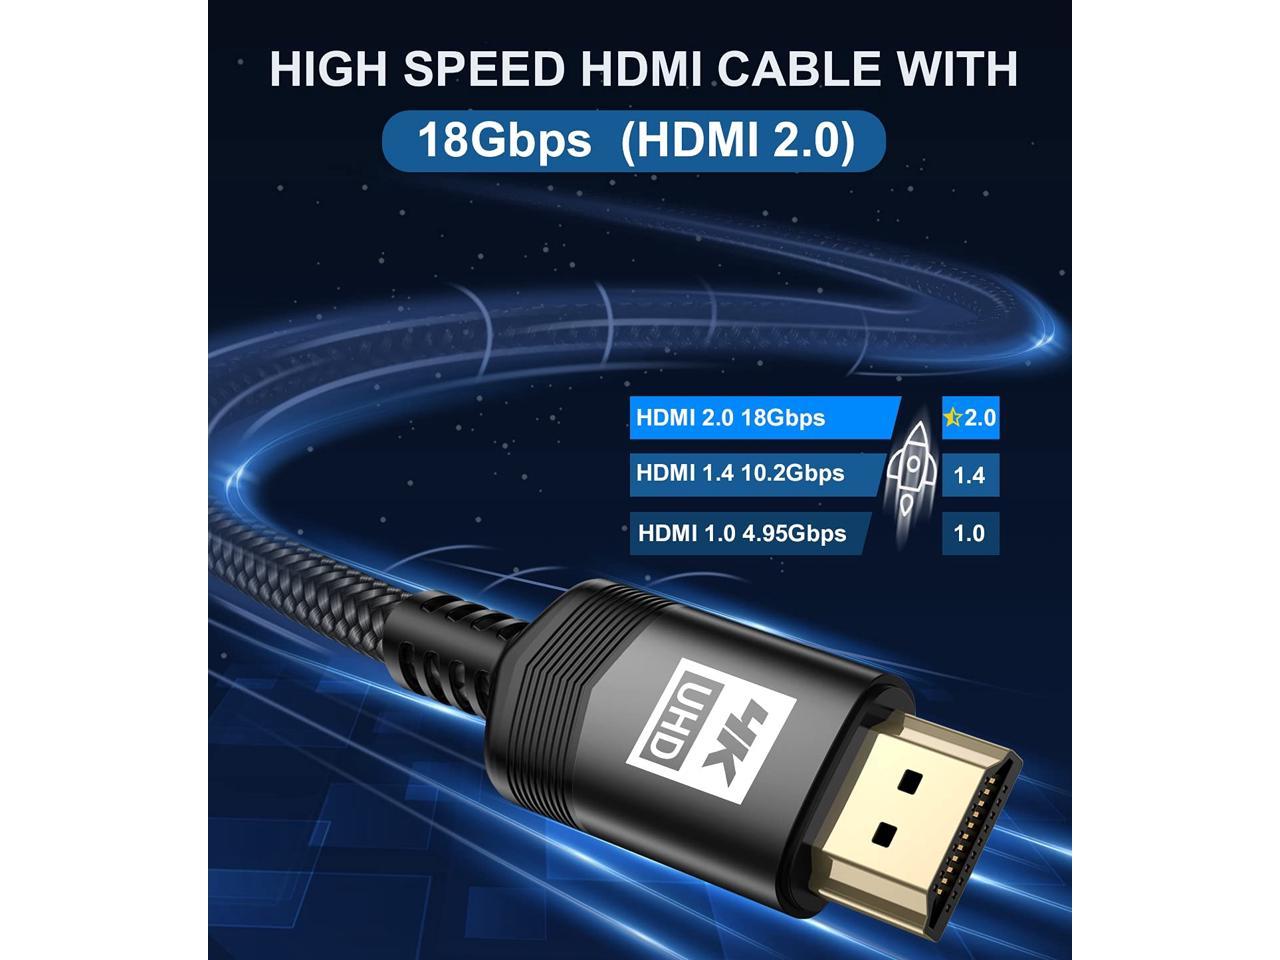 Upgraded 4K HDMI Cable 6M, AviBrex HDMI 2.0 Cable High Speed 18Gbps Nylon Braid HDMI Lead Cord Supports 4K@60Hz Video UHD 2160p,HD 1080p,3D,HDCP 2.2 ARC Compatible with Fire TV HDTV PS3 PS4 PC-Grey